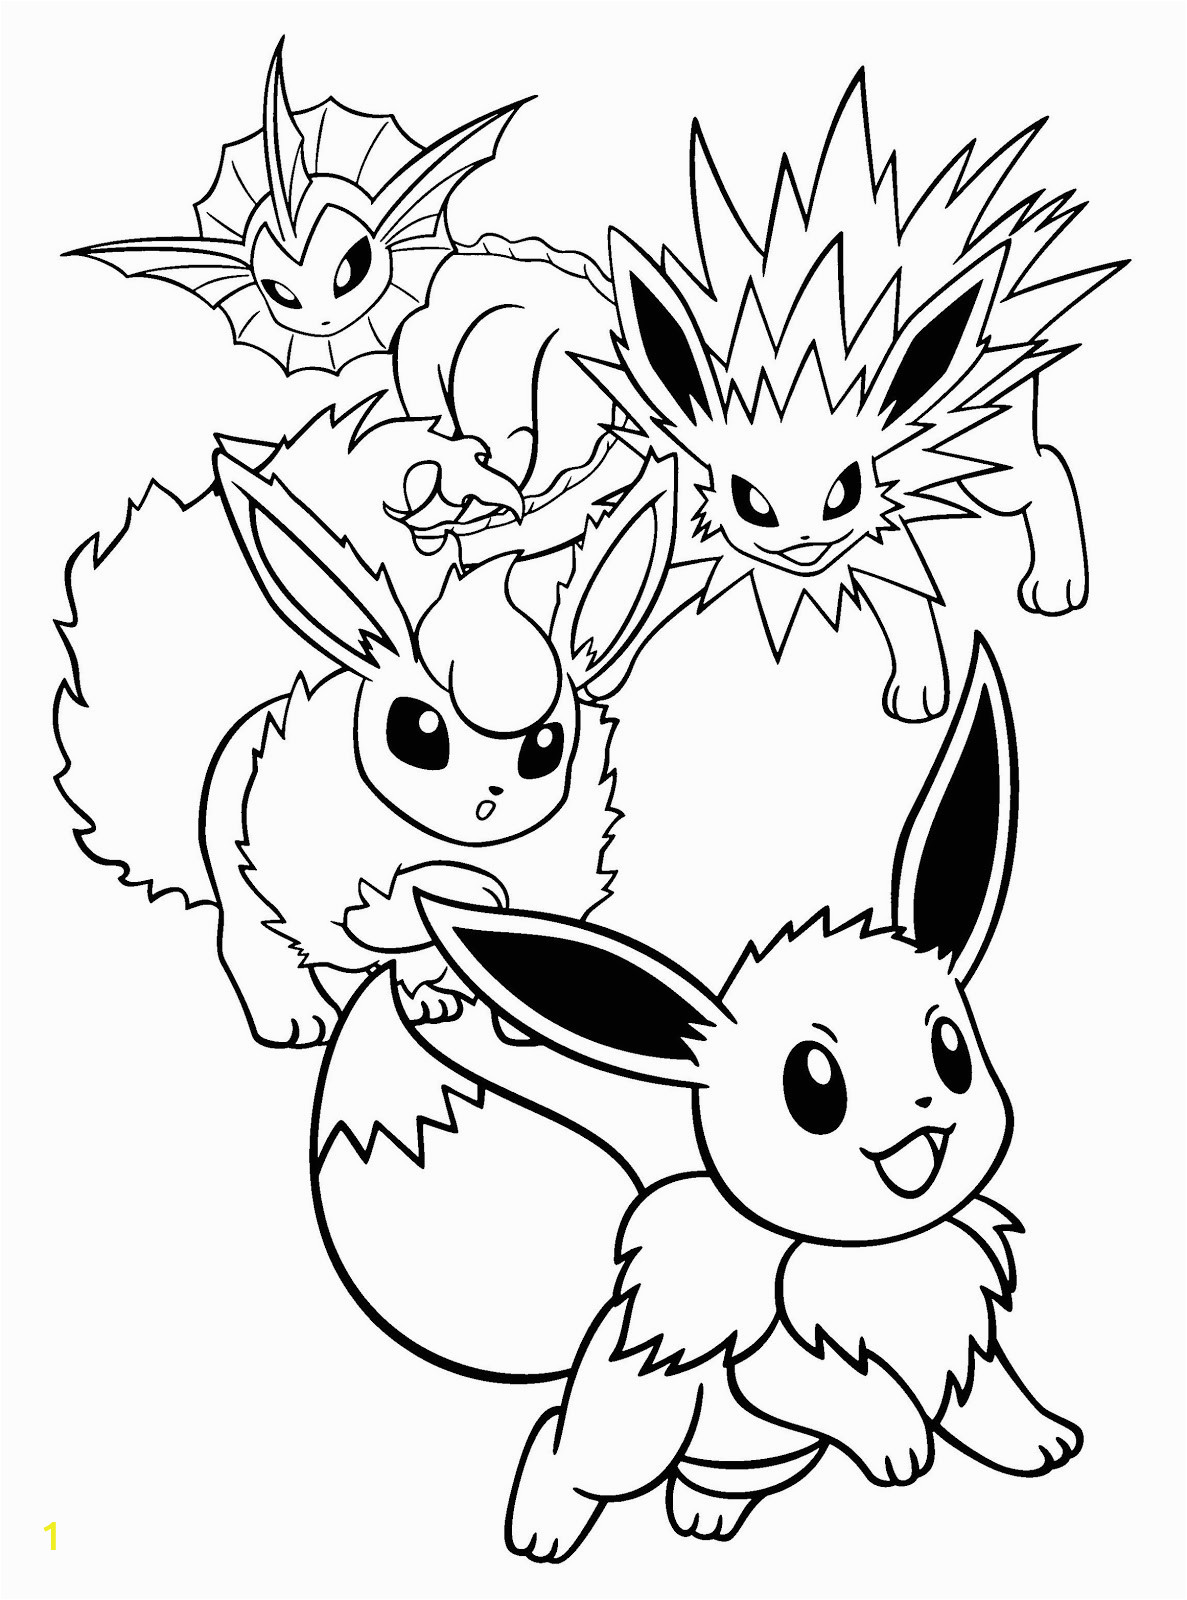 Pokemon Coloring Pages to Print for Free Eevee Coloring Pages Printable Free Pokemon Coloring Pages